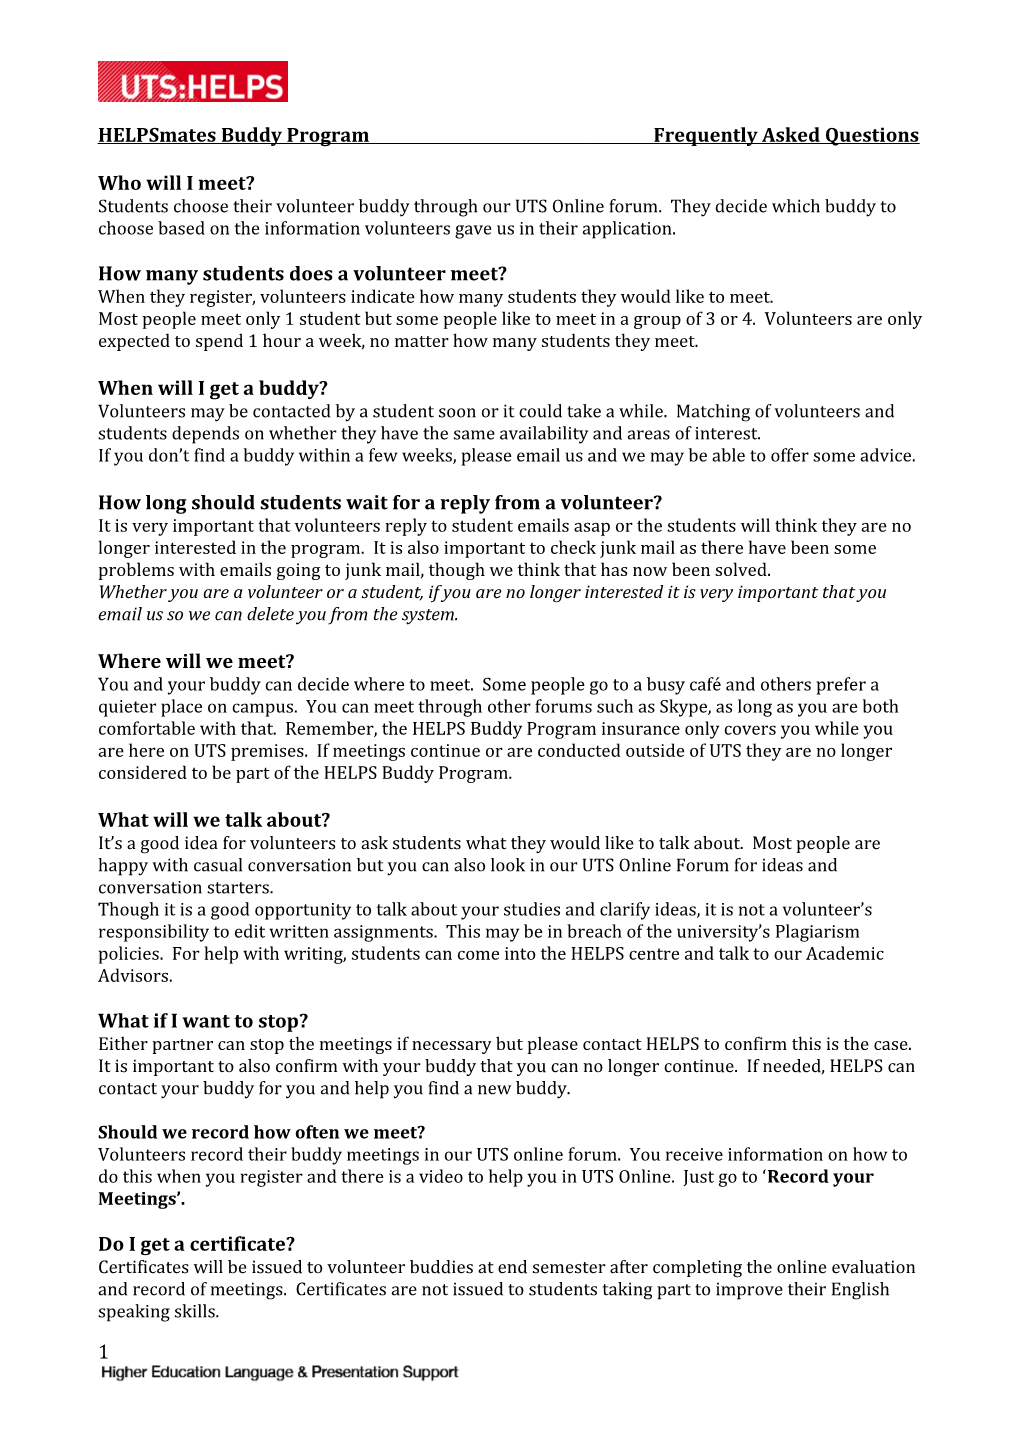 Helpsmates Buddy Program Frequently Asked Questions s1